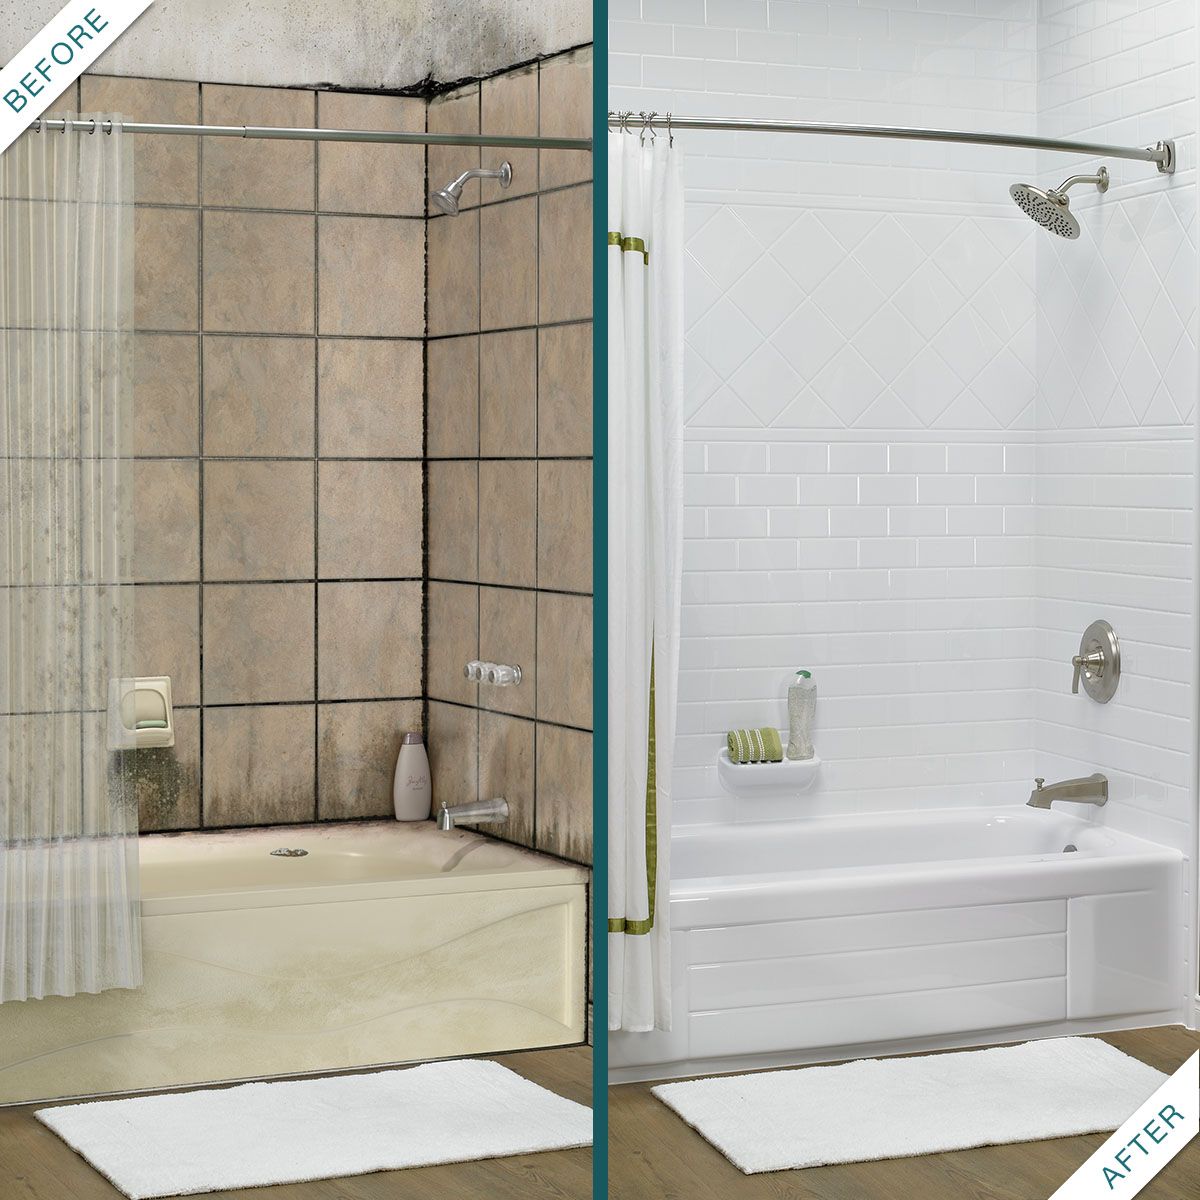 Bathroom Remodeling, Acrylic Bathtubs and Showers Bath fitter